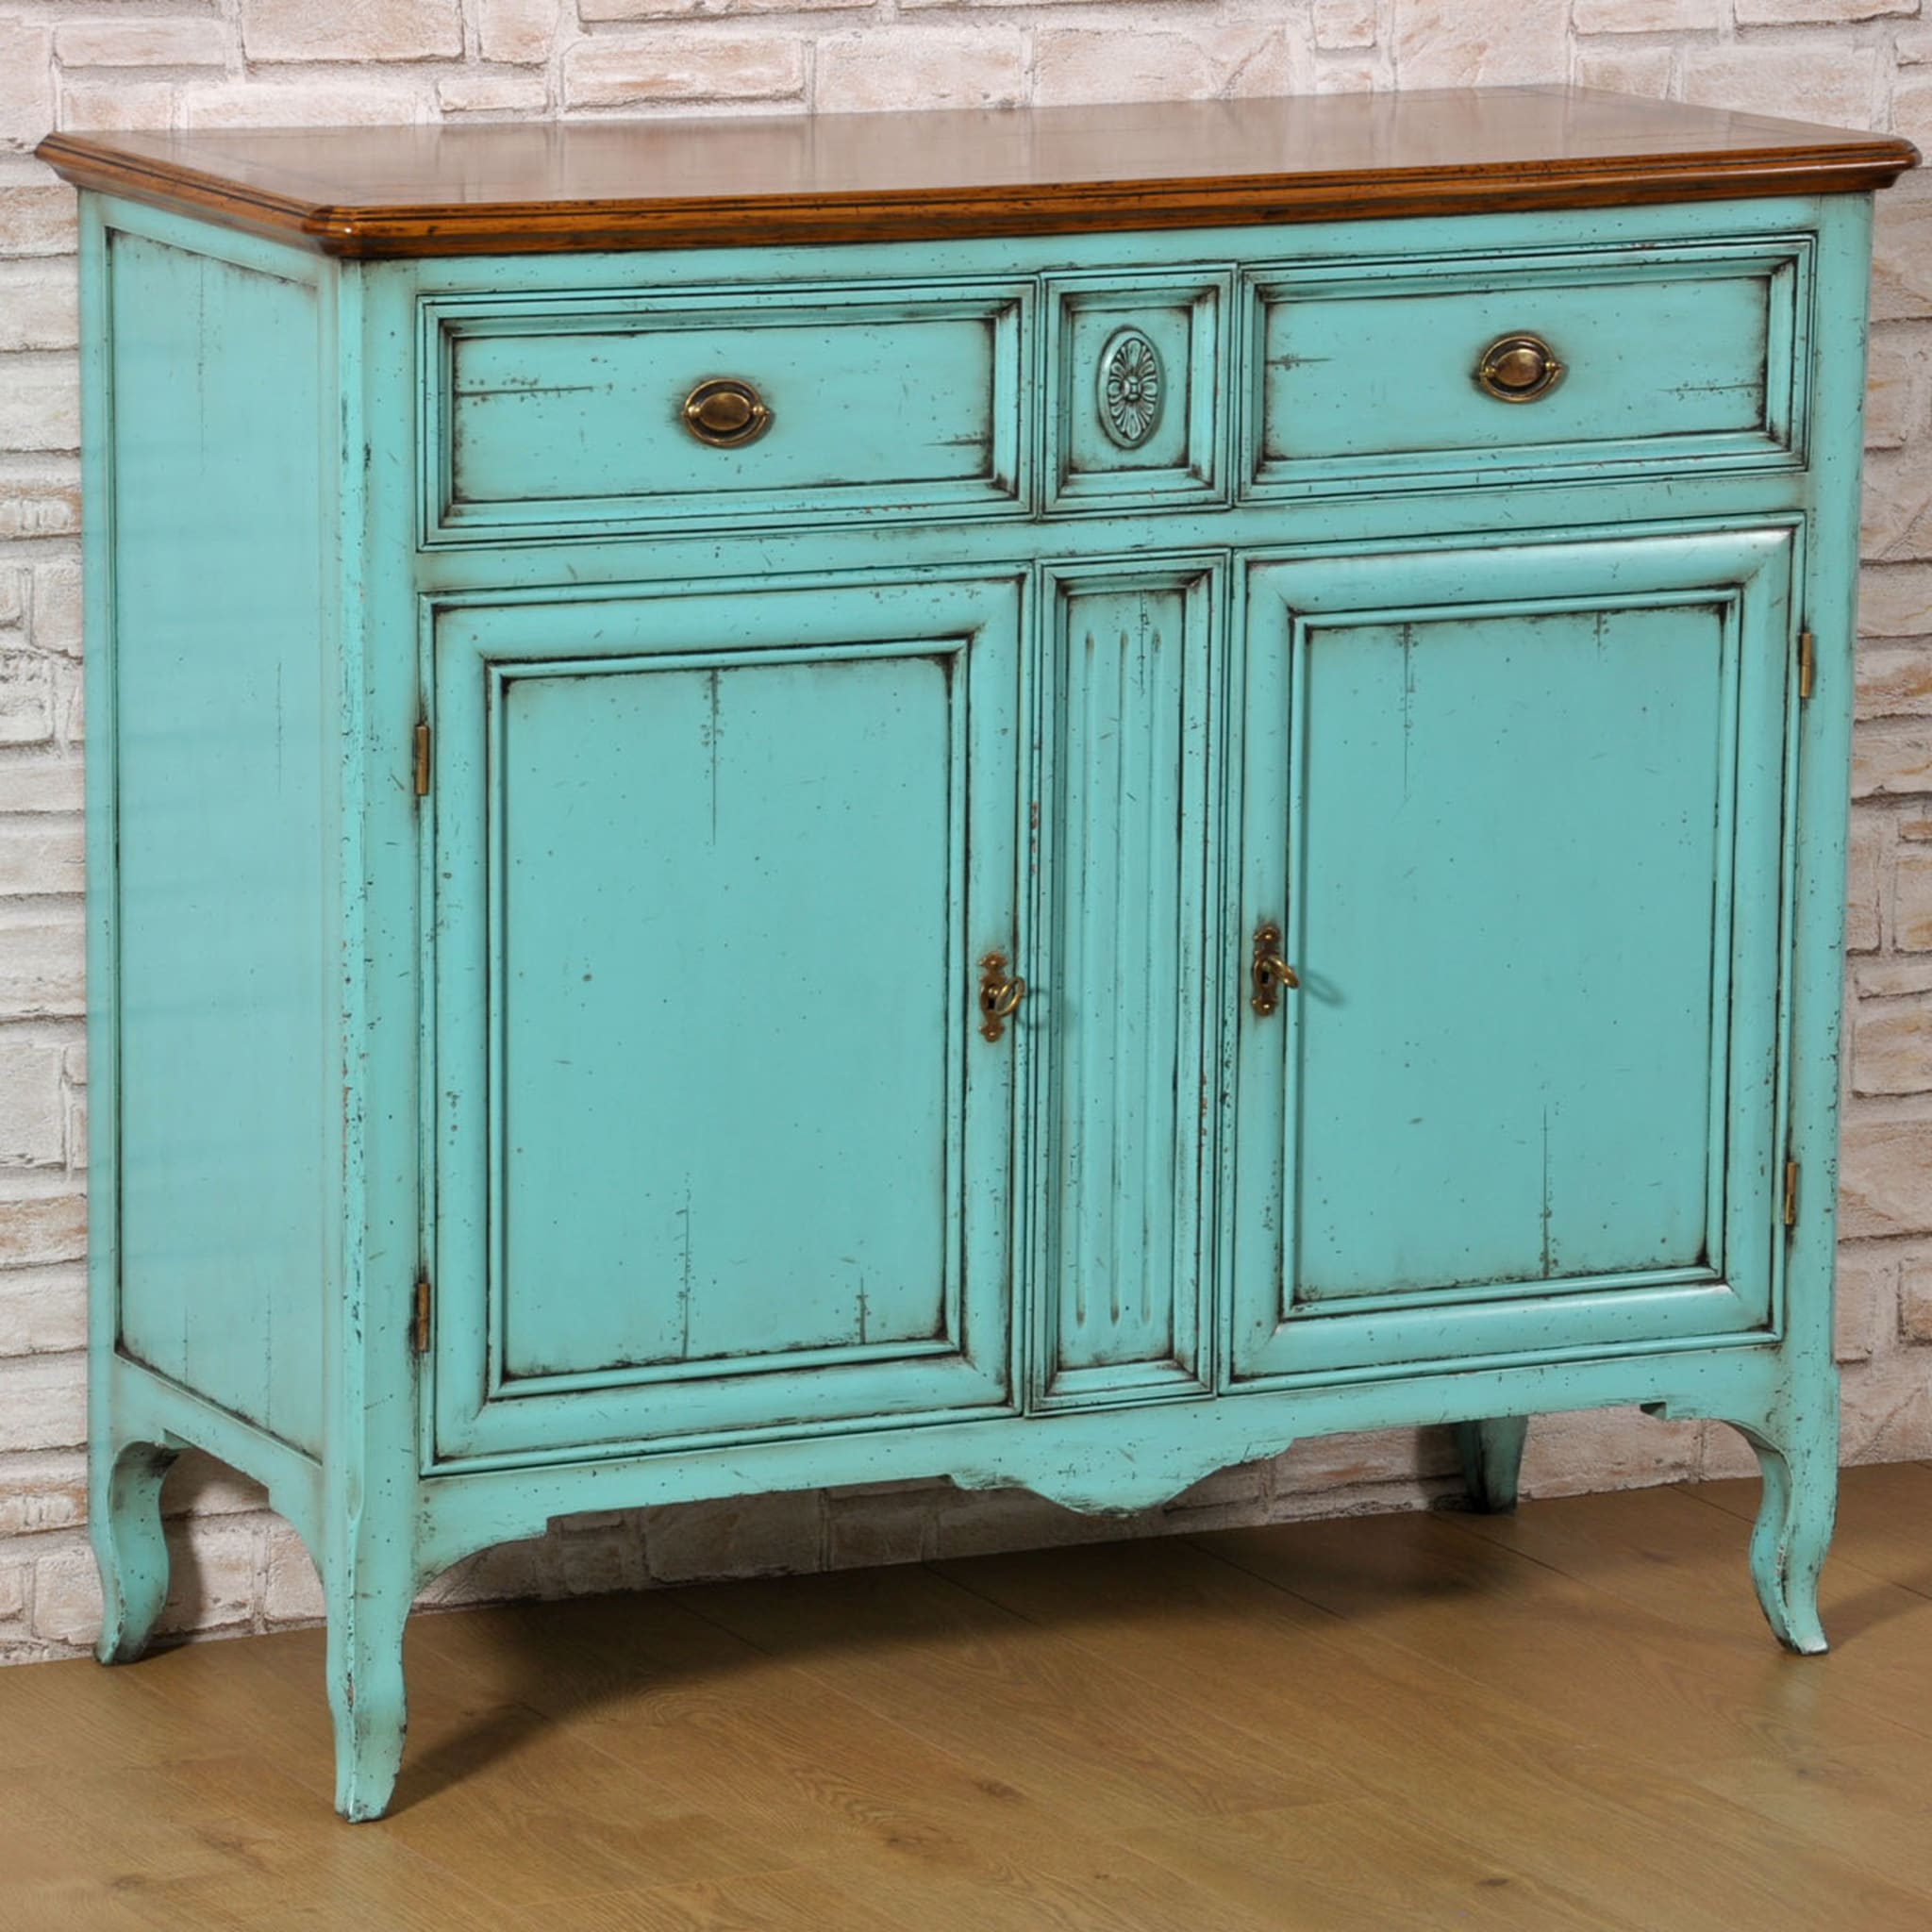 Impero '800 Empire-Style Turquoise Sideboard - Alternative view 2